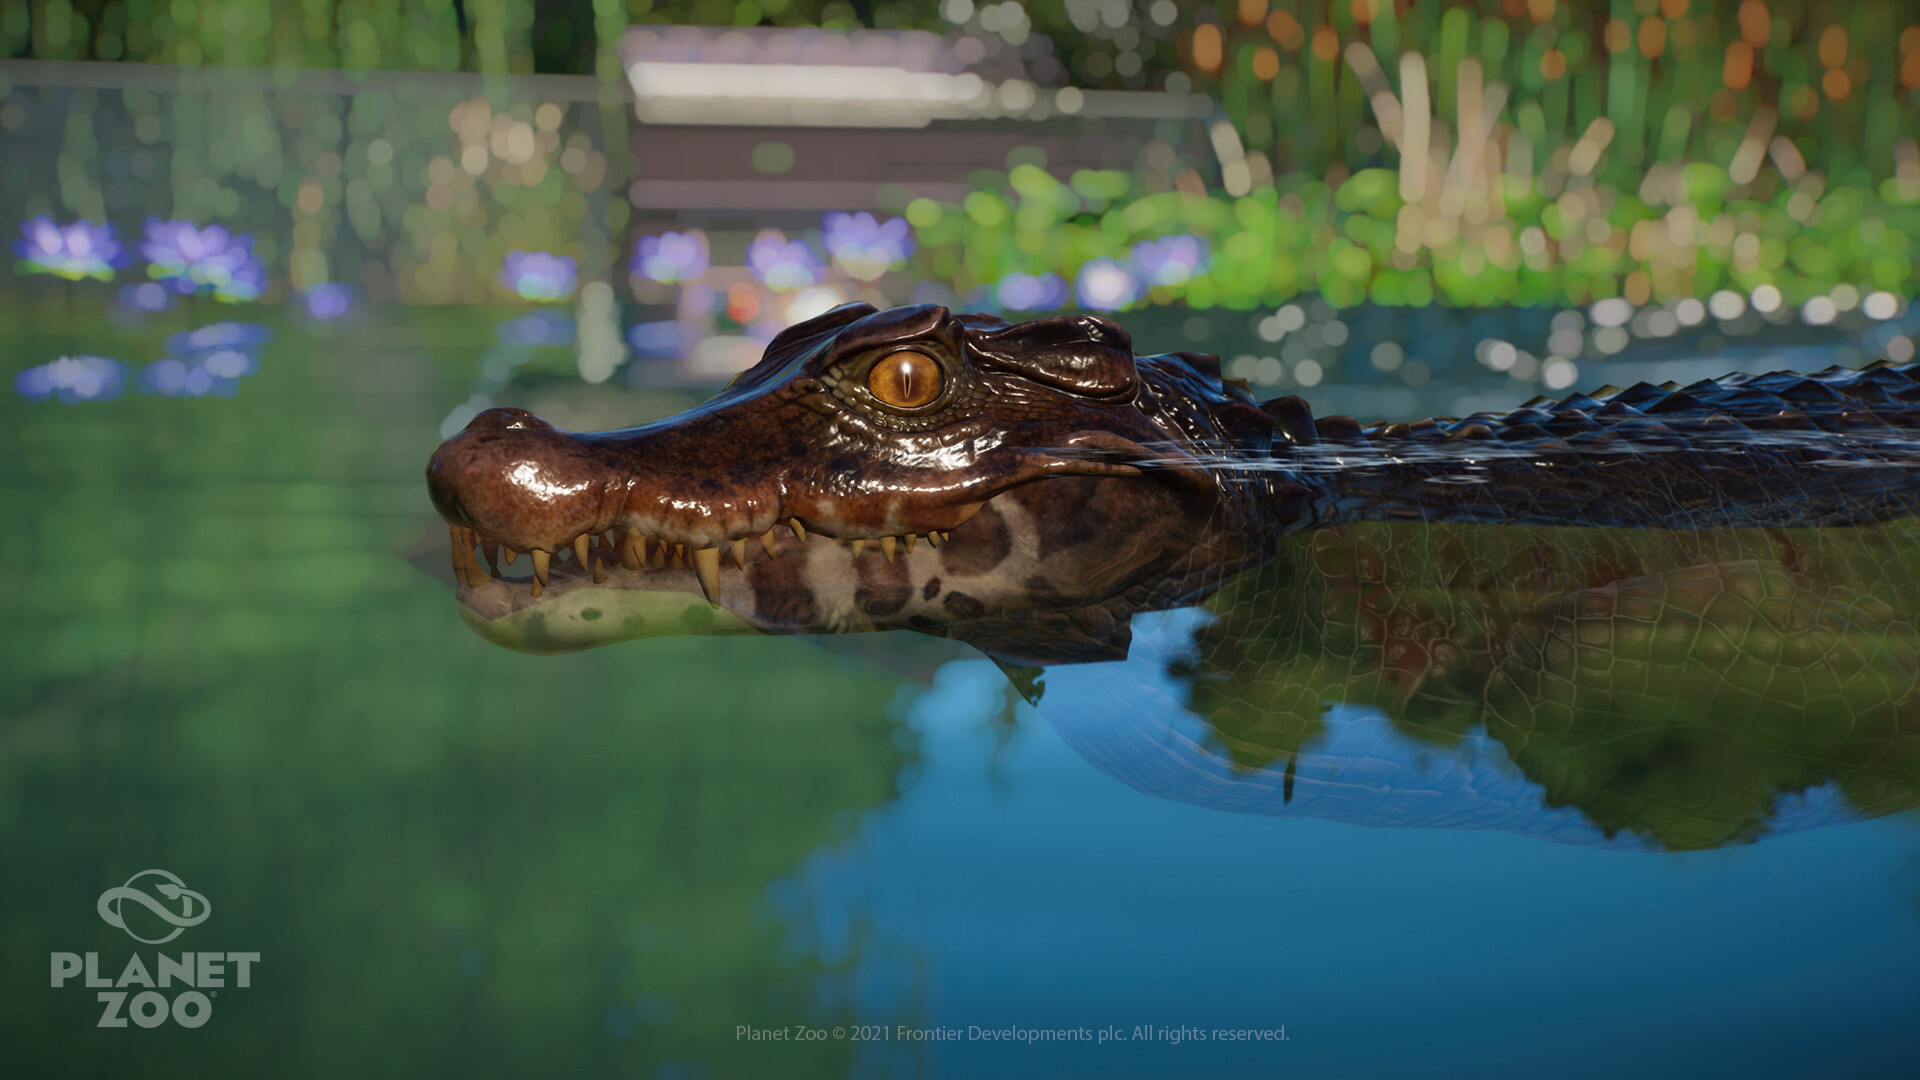 Name one animal you almost forgot existed in Planet Zoo. I'll start:  Spectacled Caiman : r/PlanetZoo